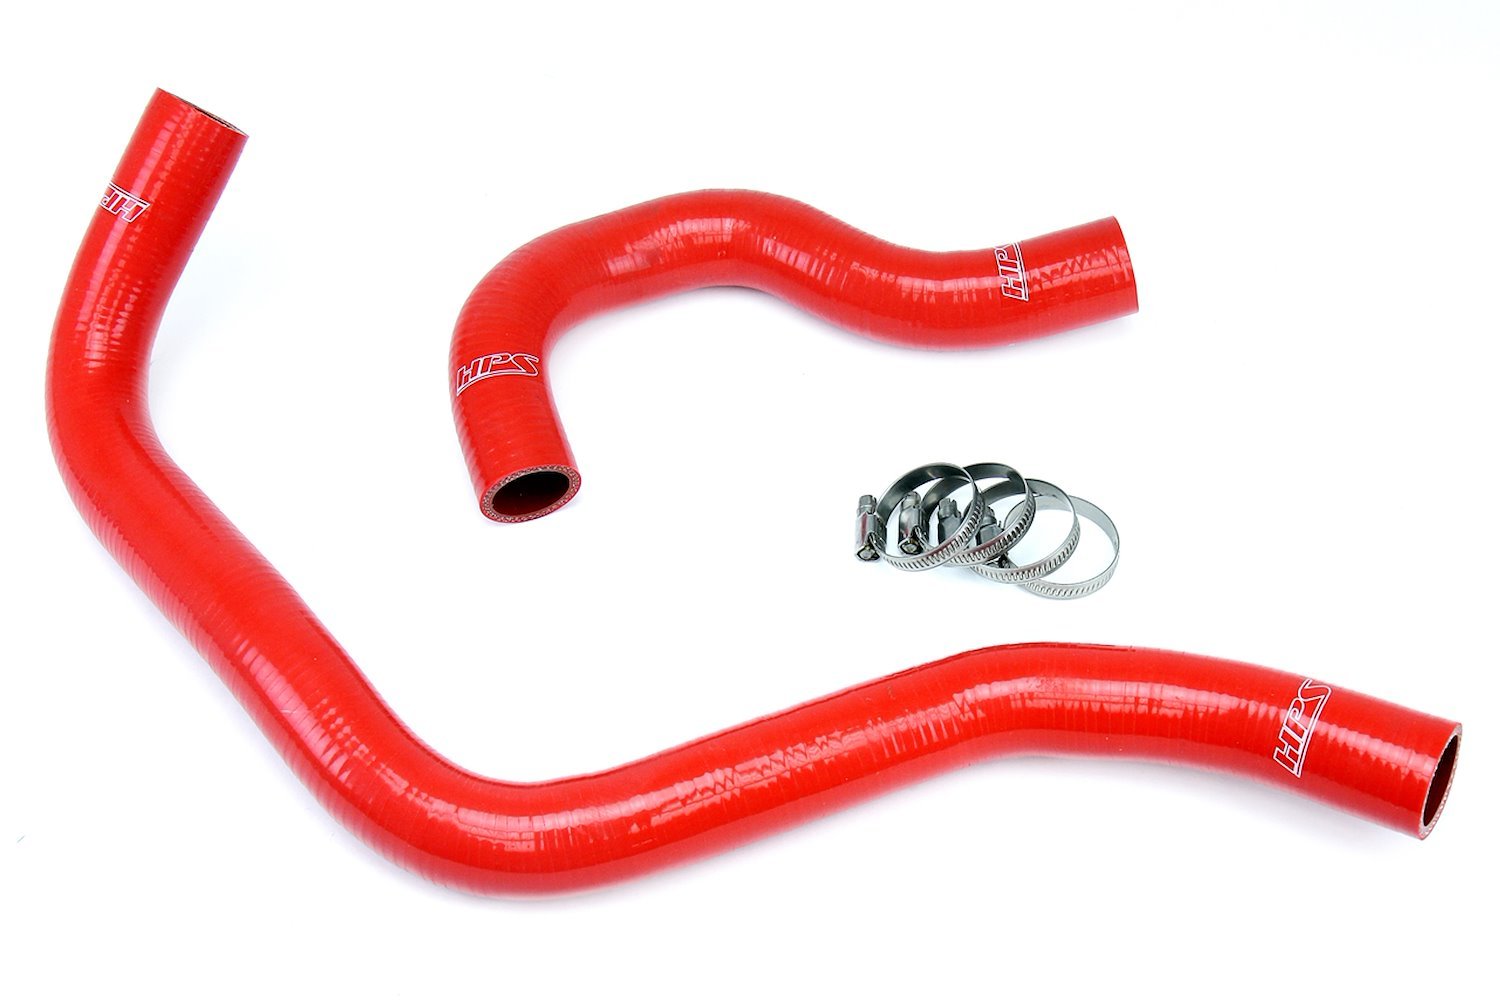 57-1002-RED Radiator Hose Kit, High-Temp 3-Ply Reinforced Silicone, Replace OEM Rubber Radiator Coolant Hoses